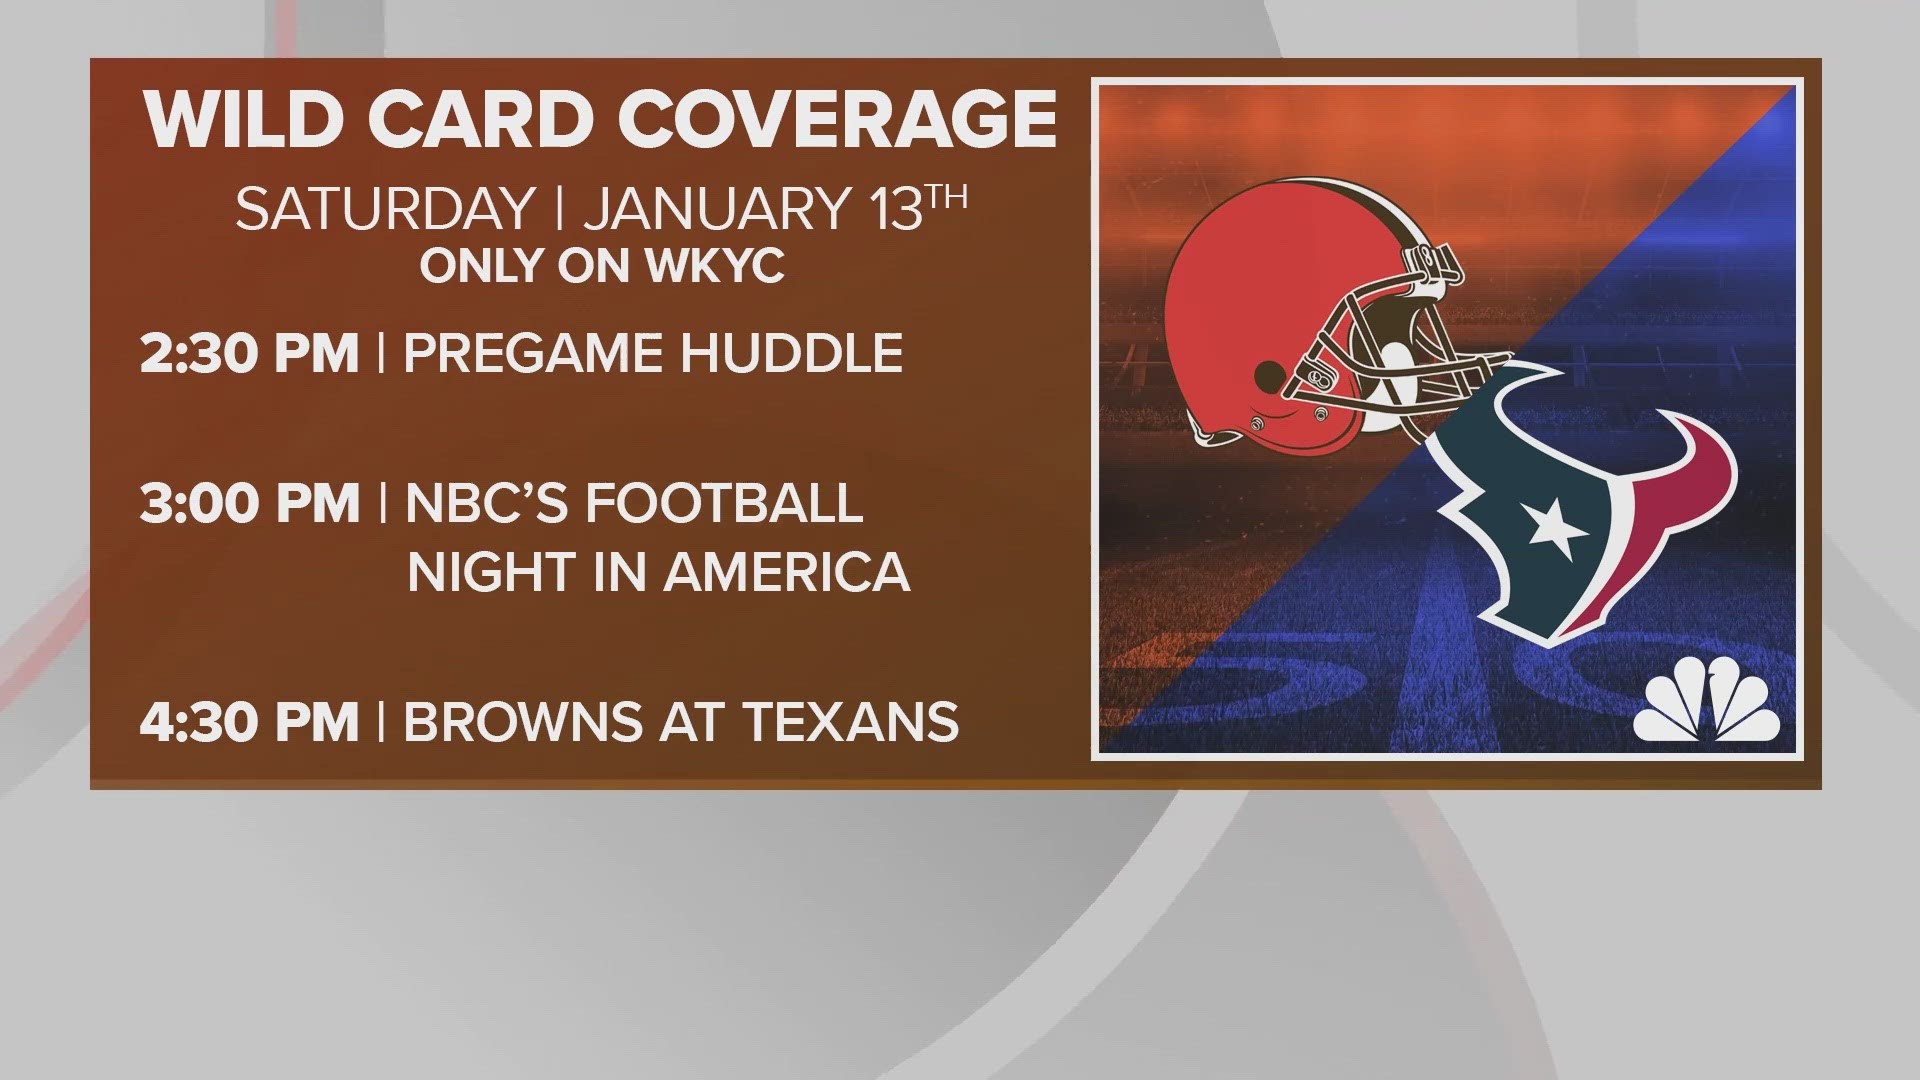 The Cleveland Browns will battle the Houston Texans in the AFC Wild-Card game, which will air on WKYC at 4:30 p.m. on Saturday, Jan. 13.